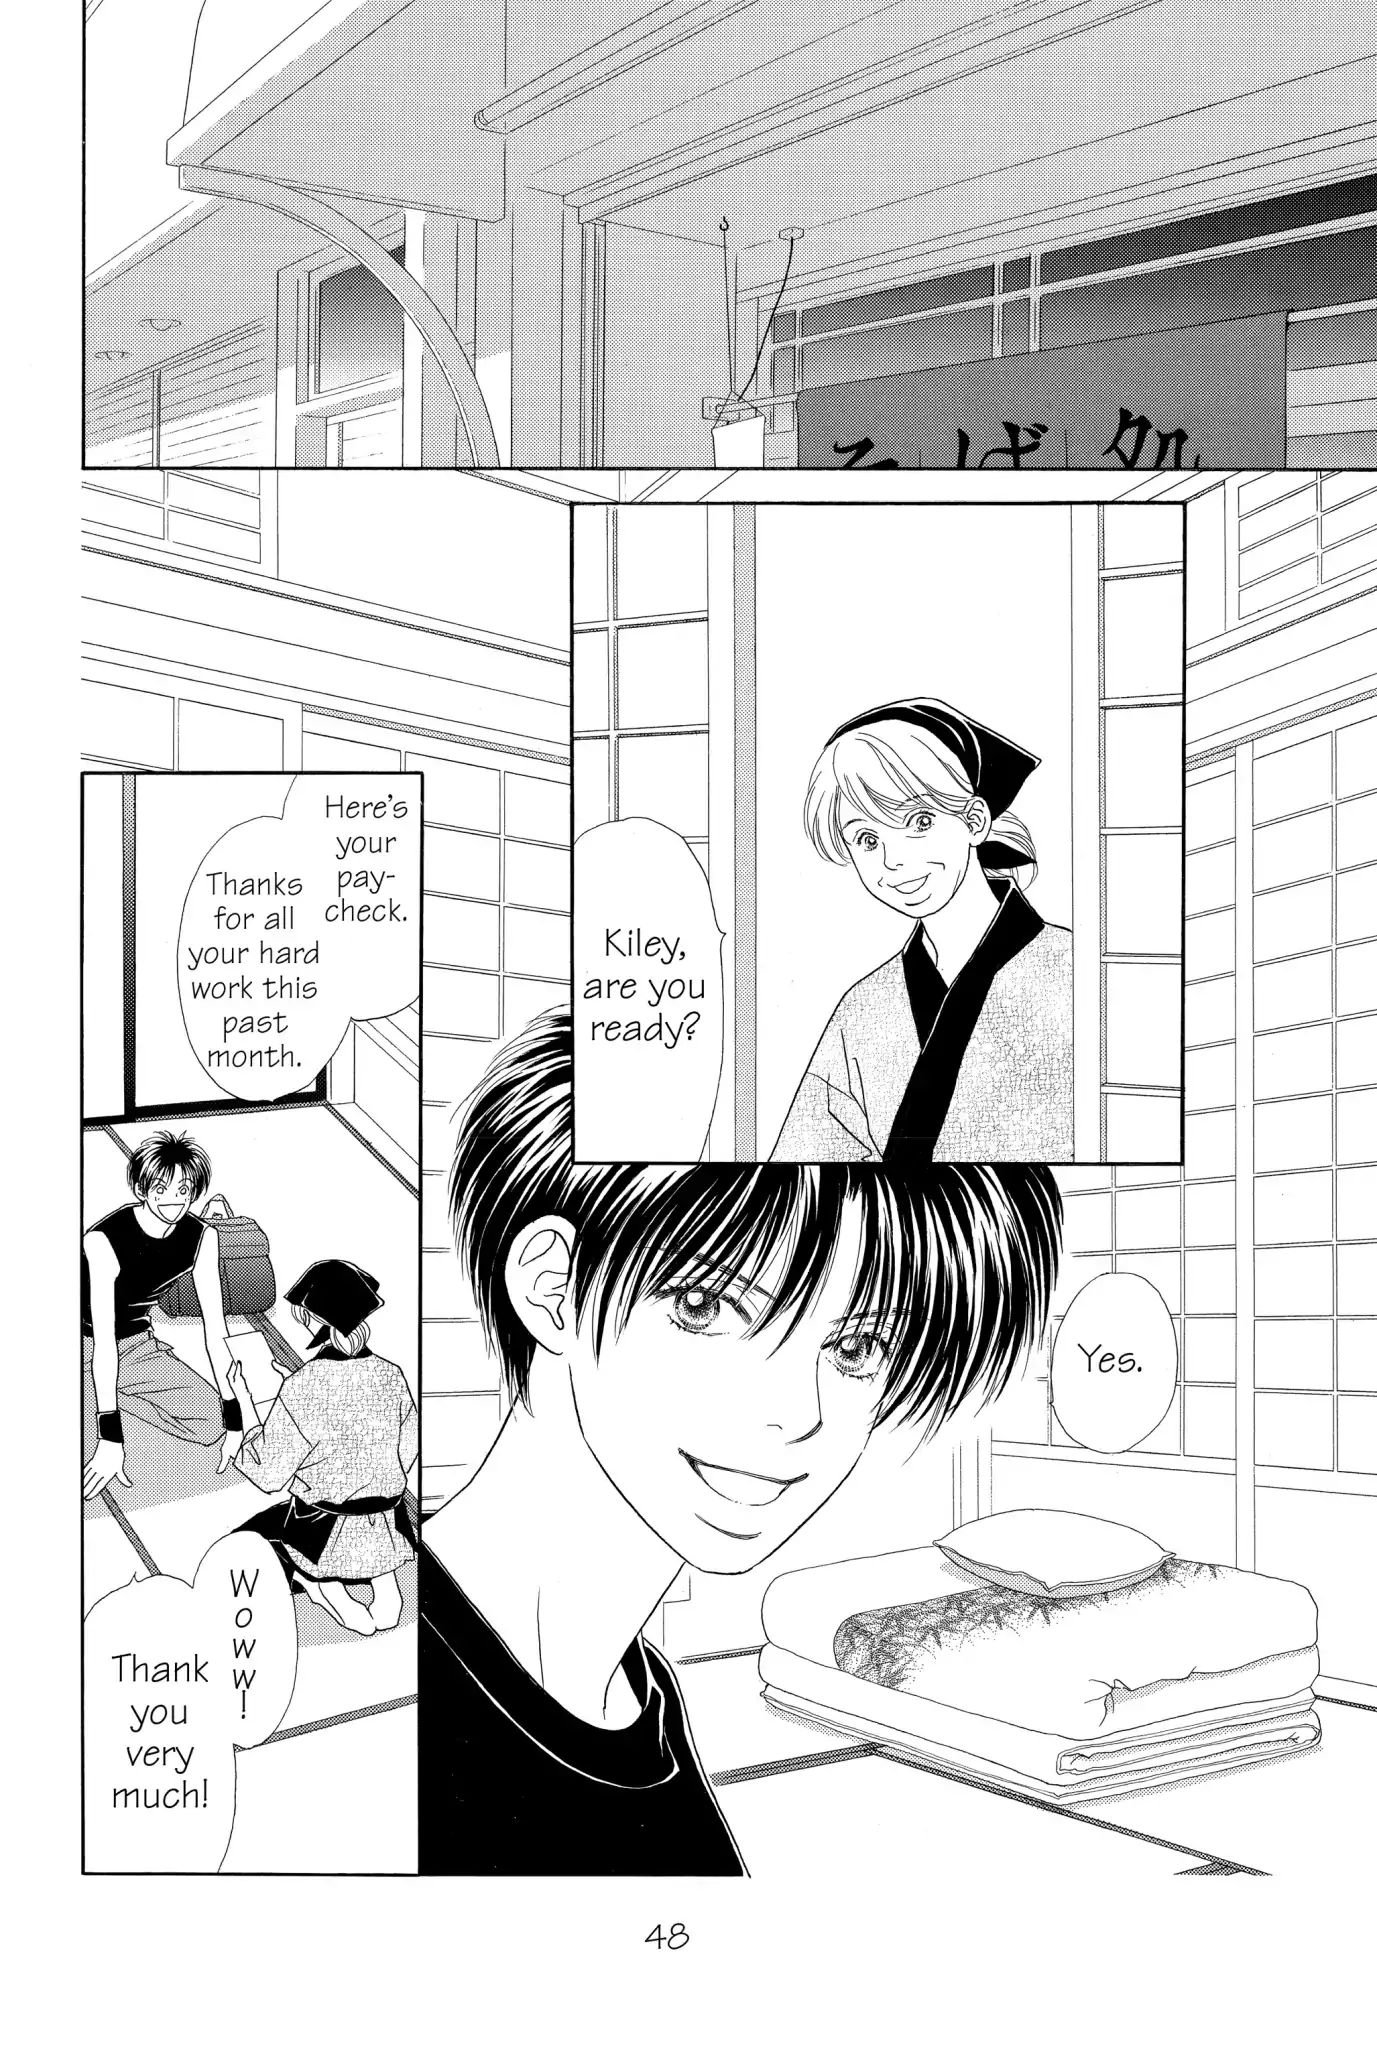 Peach Girl - Page 1